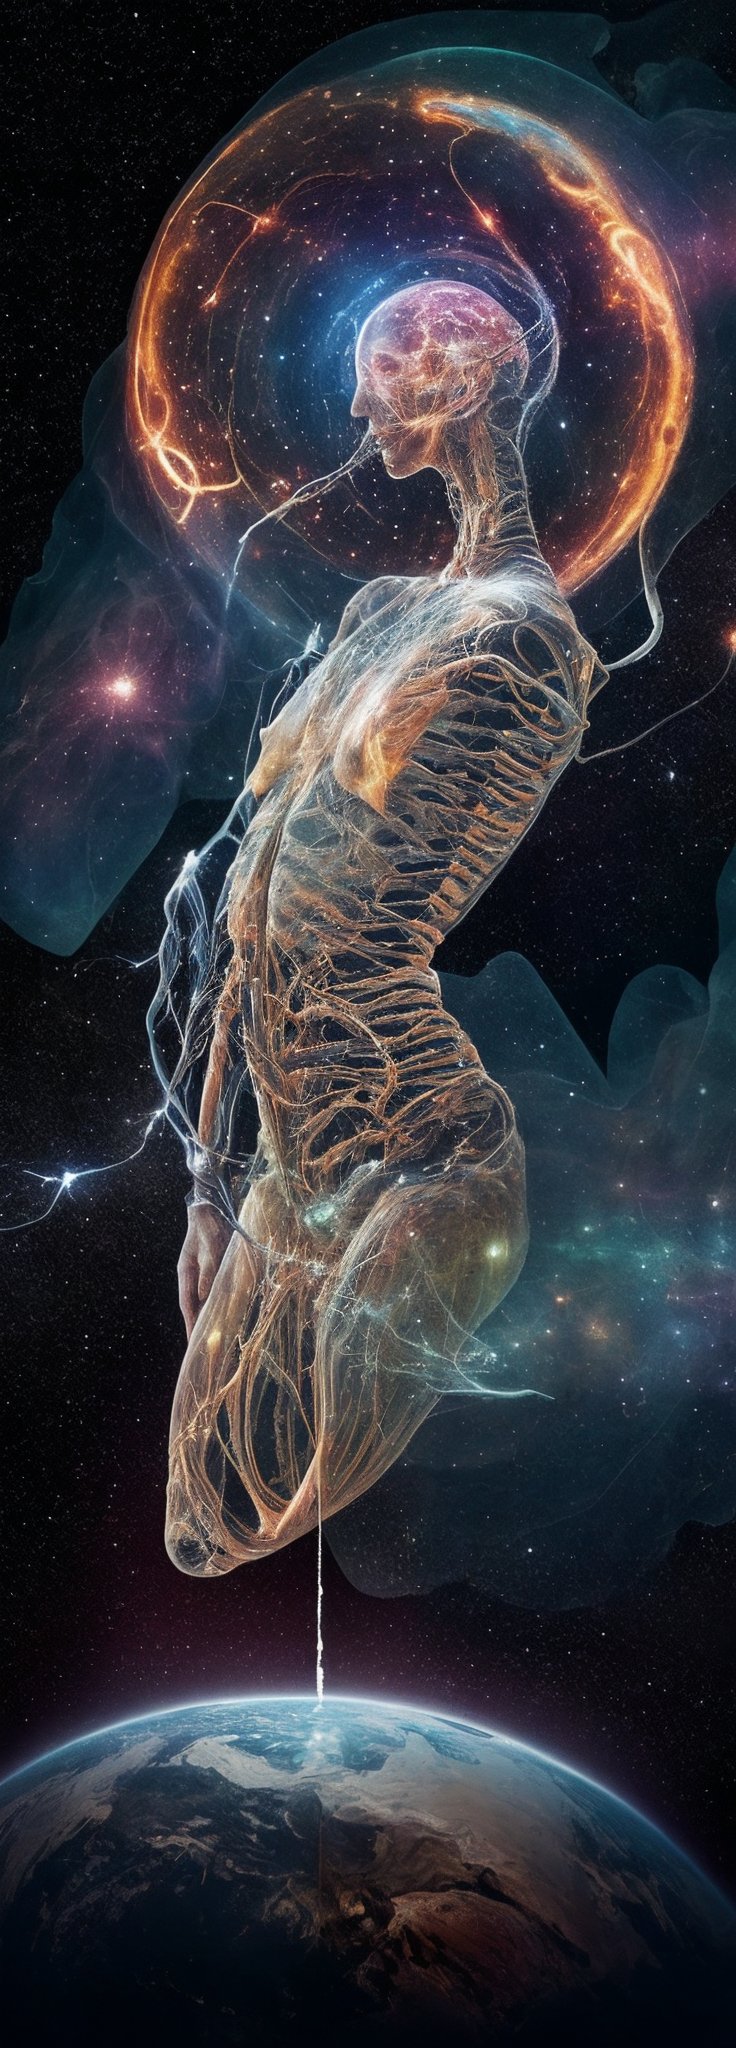 In this surreal still life, a transparent gelatin mold takes shape to form a human body, its translucent form suspended amidst the swirling stars of the Milky Way. The brain and nervous system, aglow with vibrant hues, resemble a celestial map etched within the gelatin's delicate folds. Scenic lights cast an ethereal glow, as if cosmic forces have awakened the intricate neural networks, illuminating the fragile structures from within.,Extremely Realistic